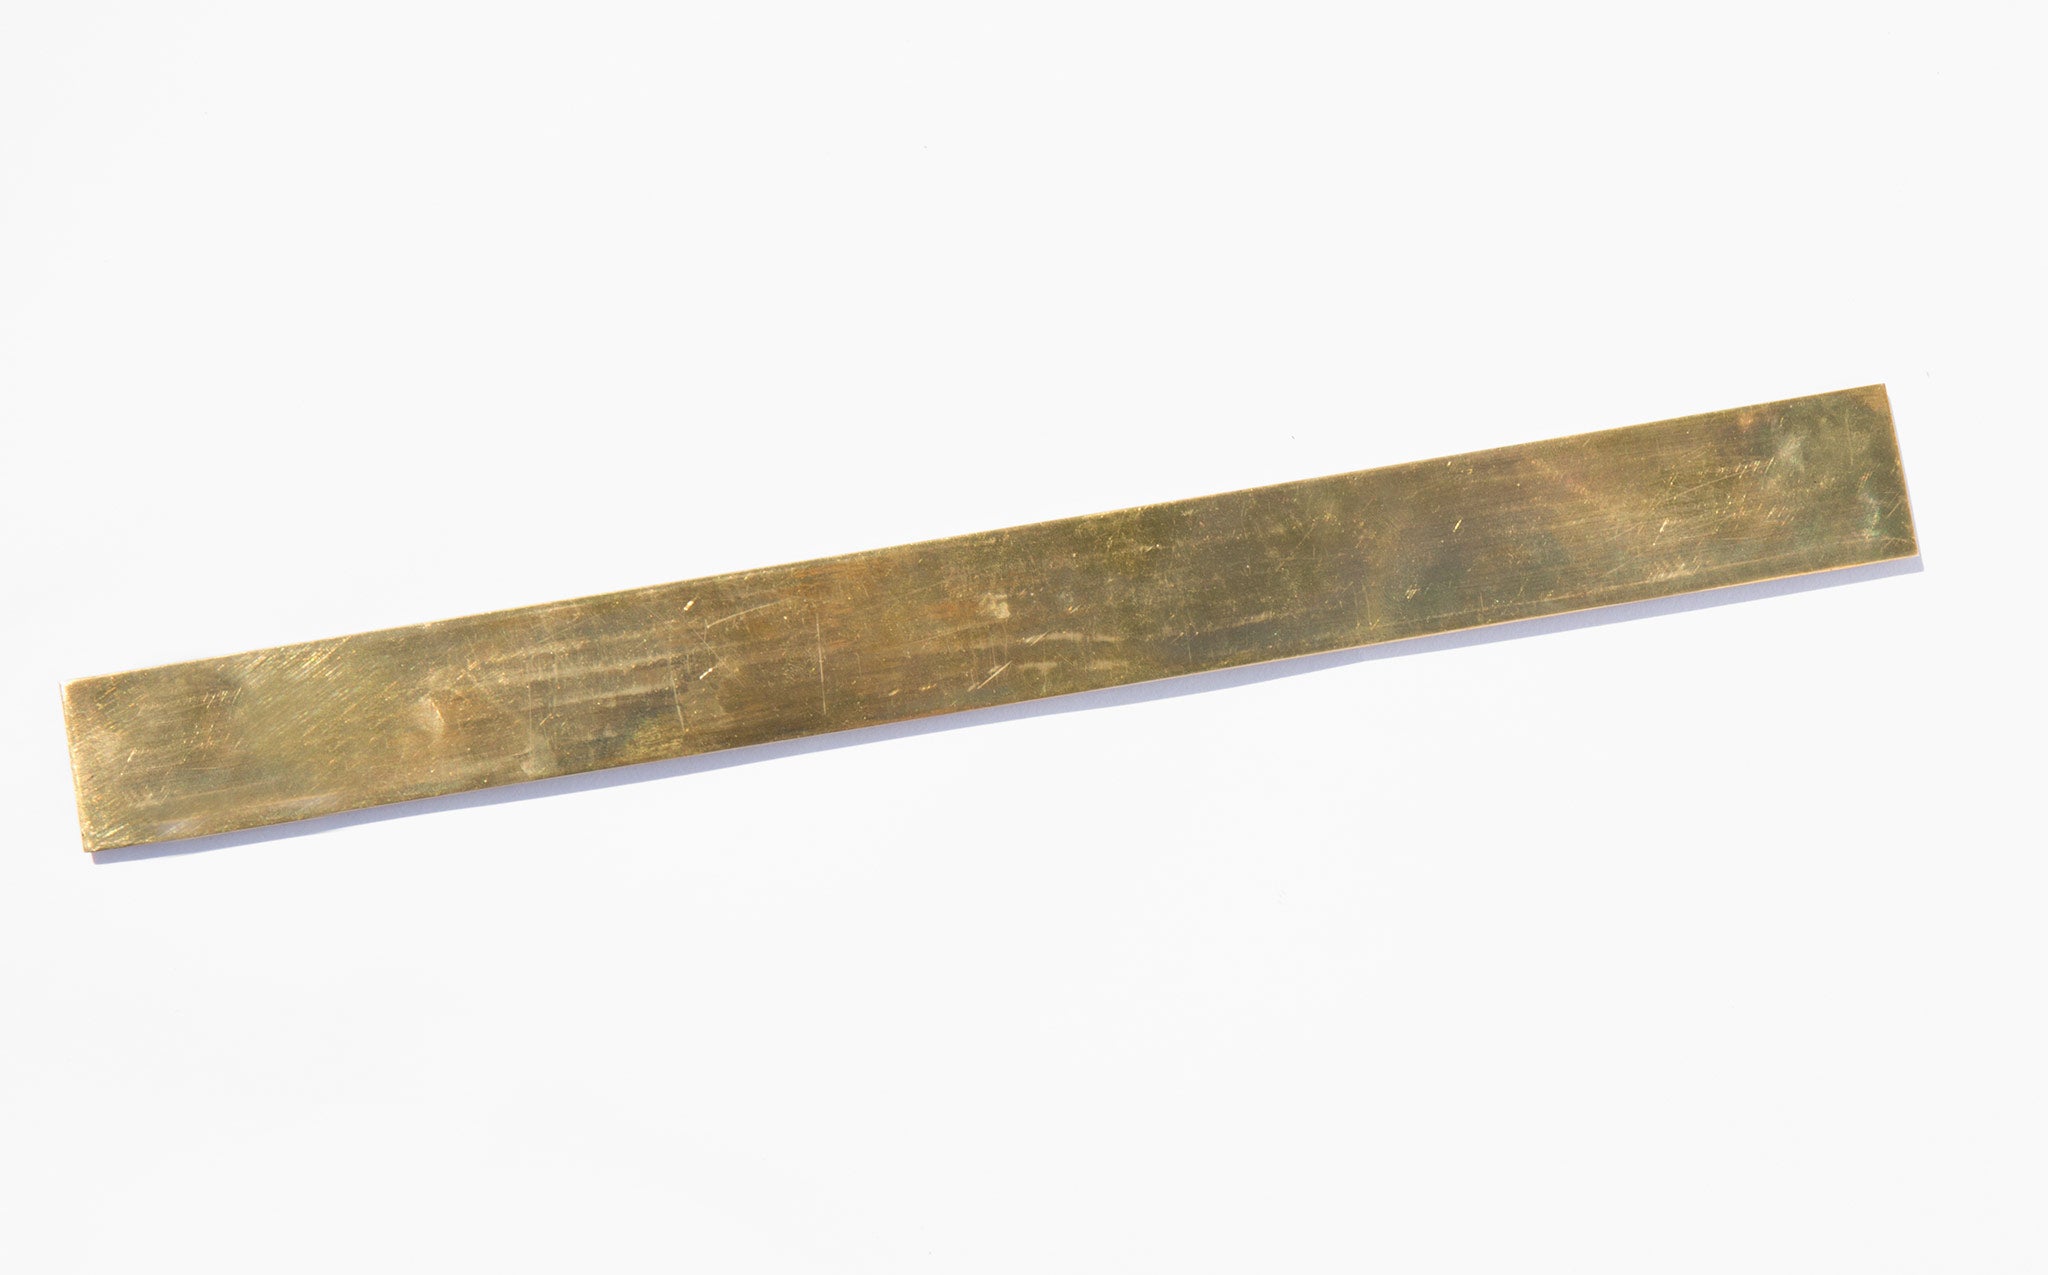 Etched Brass Ruler